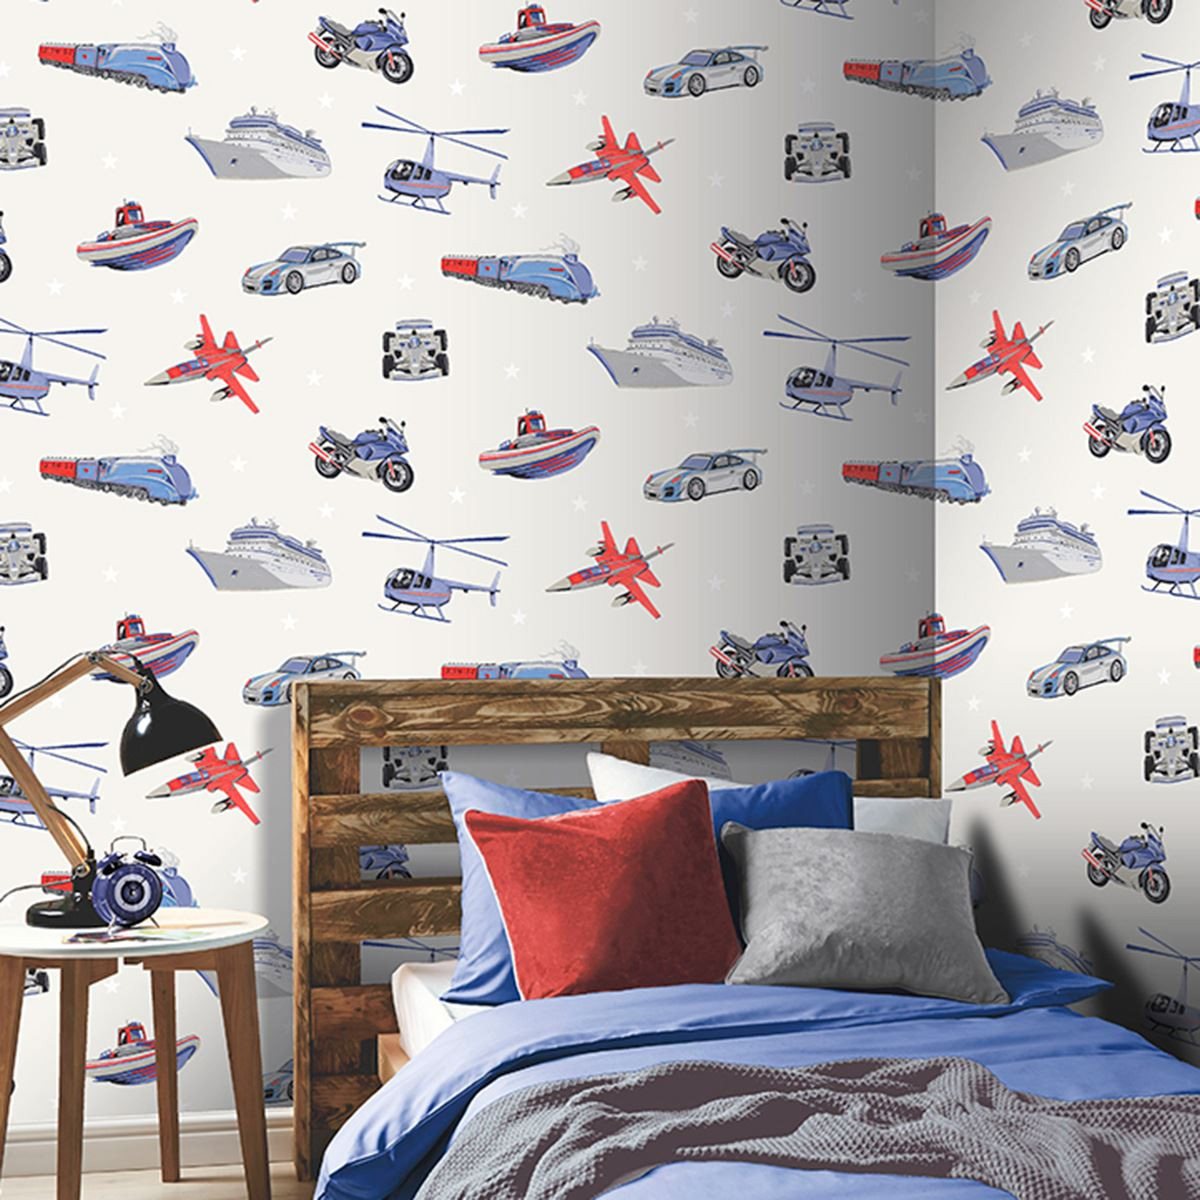 Wall Borders For Kids Room
 TRANSPORT AND VEHICLES THEMED WALLPAPER & BORDERS BEDROOM